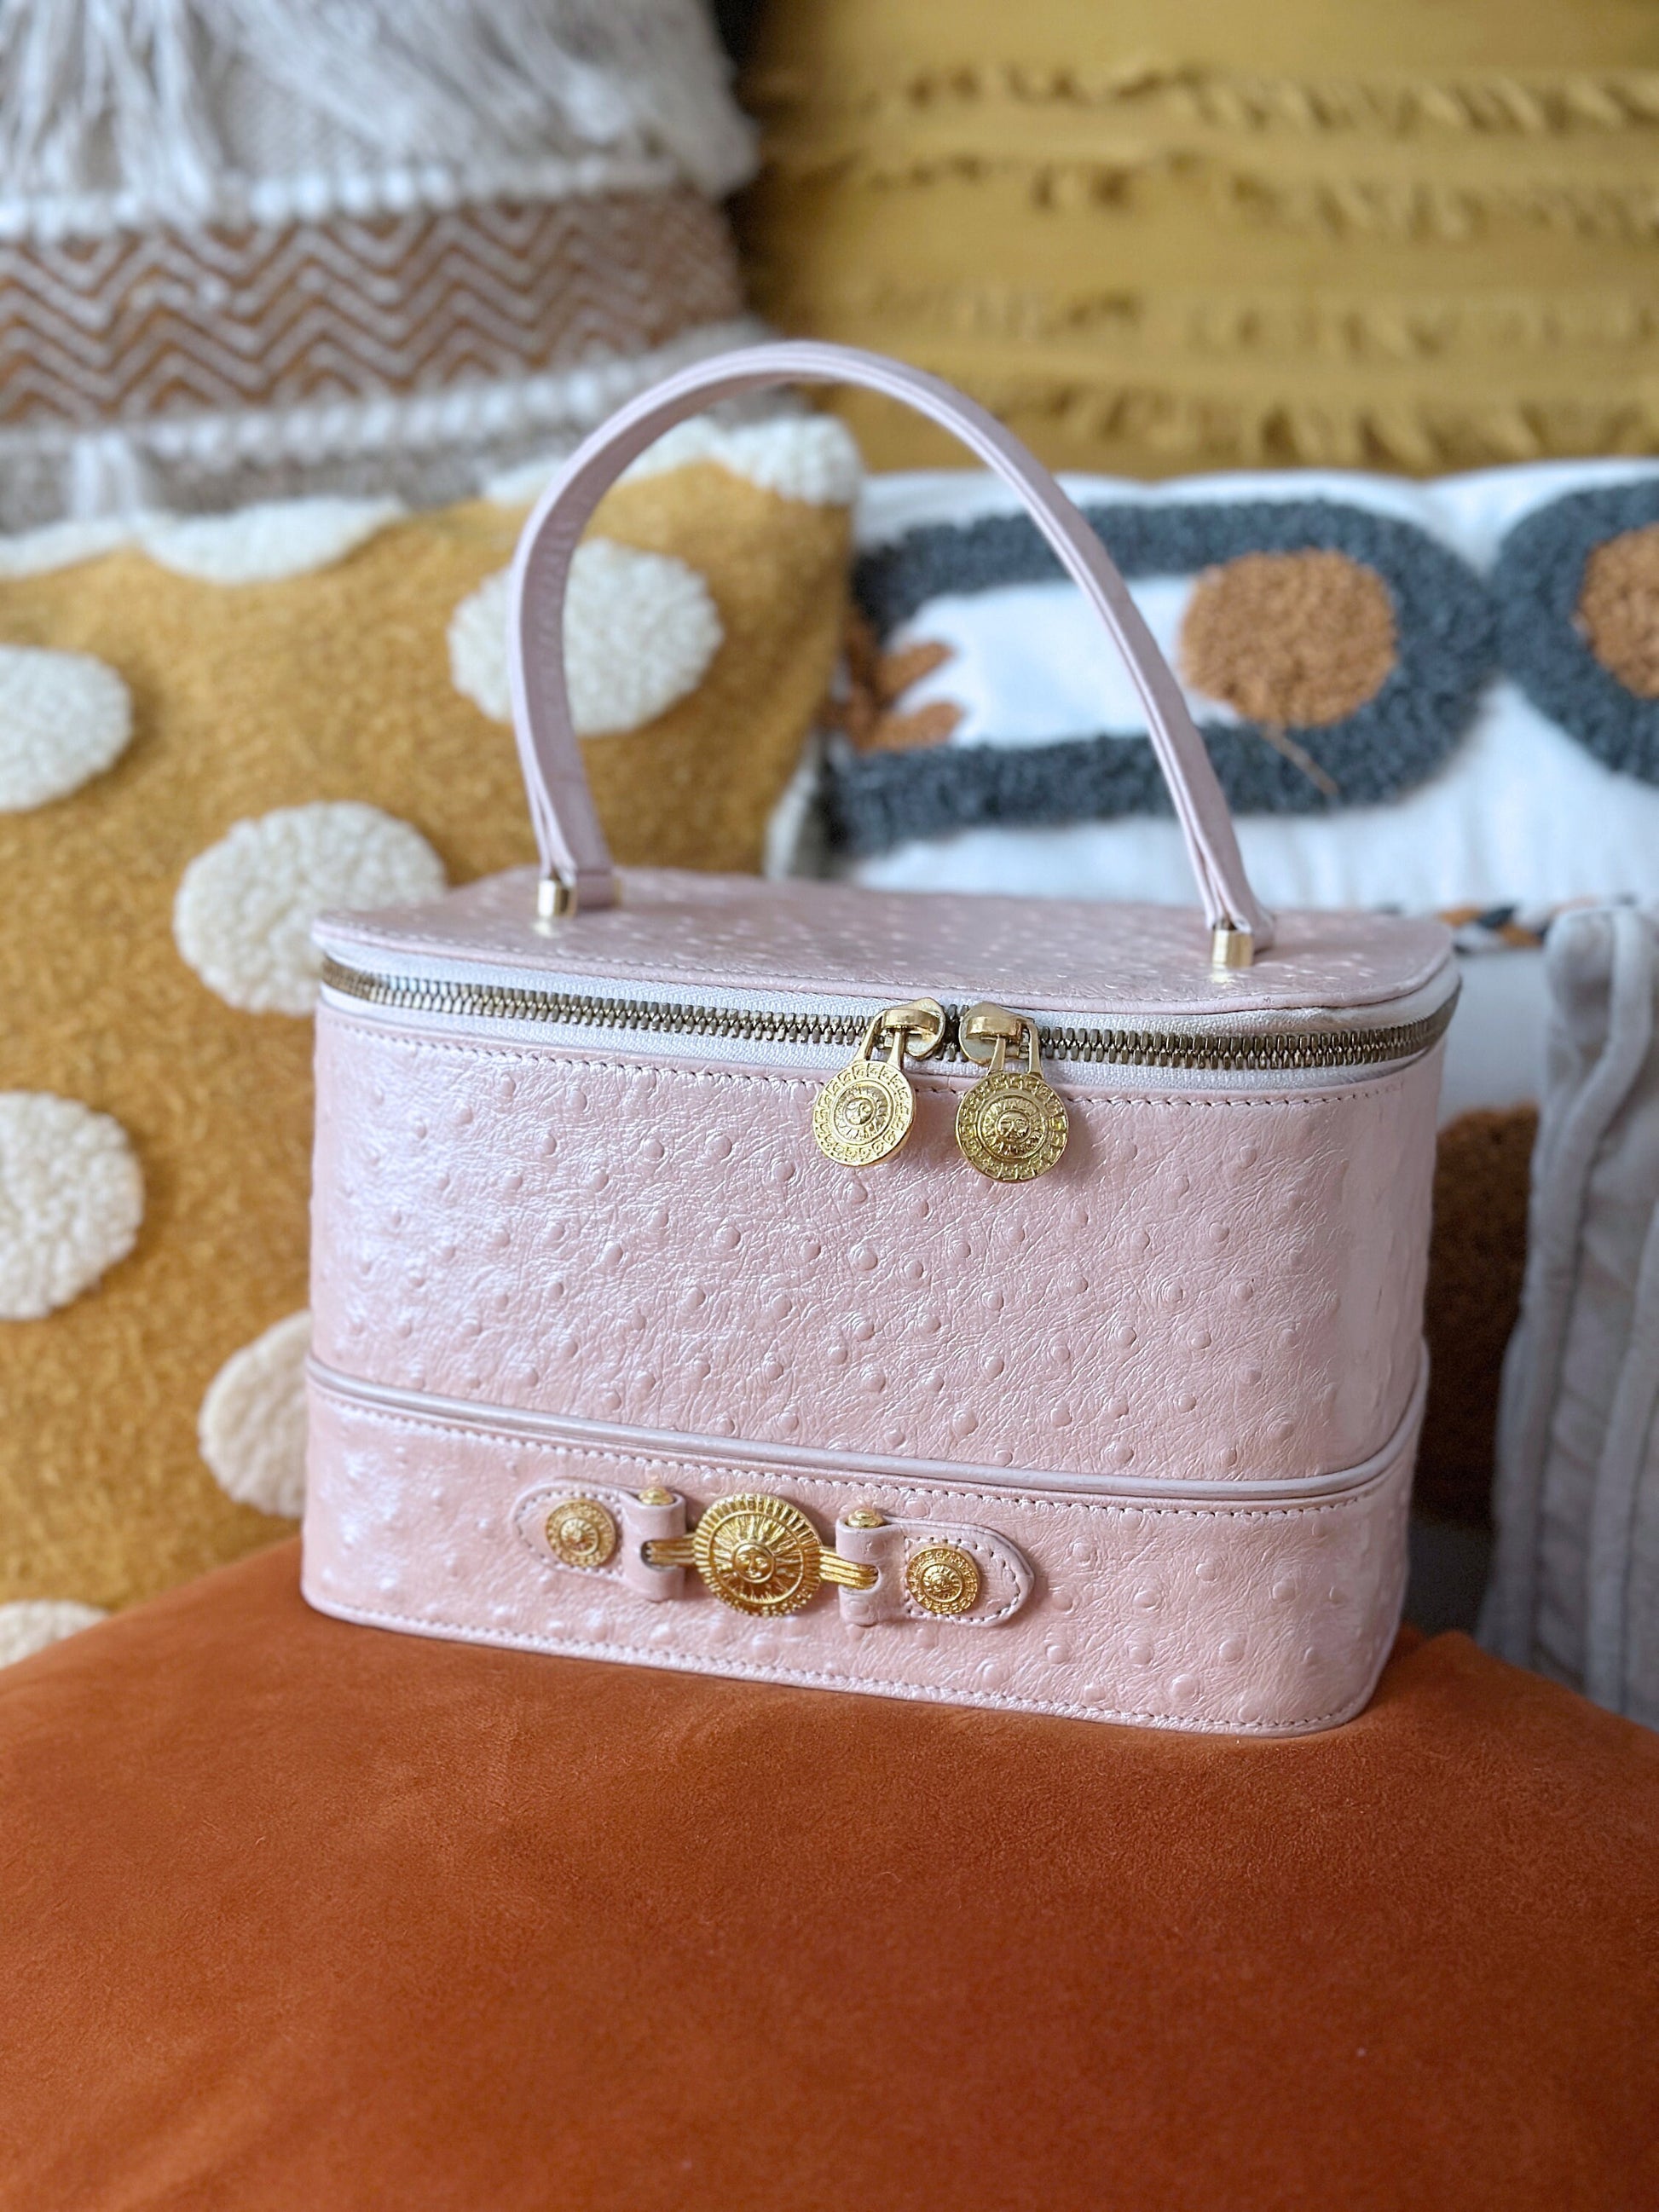 VERSACE VINTAGE 100% Authentic Genuine Ostrich Leather Makeup Case Bag, Pastel Pink, 1990's, Great Condition, Grade AB